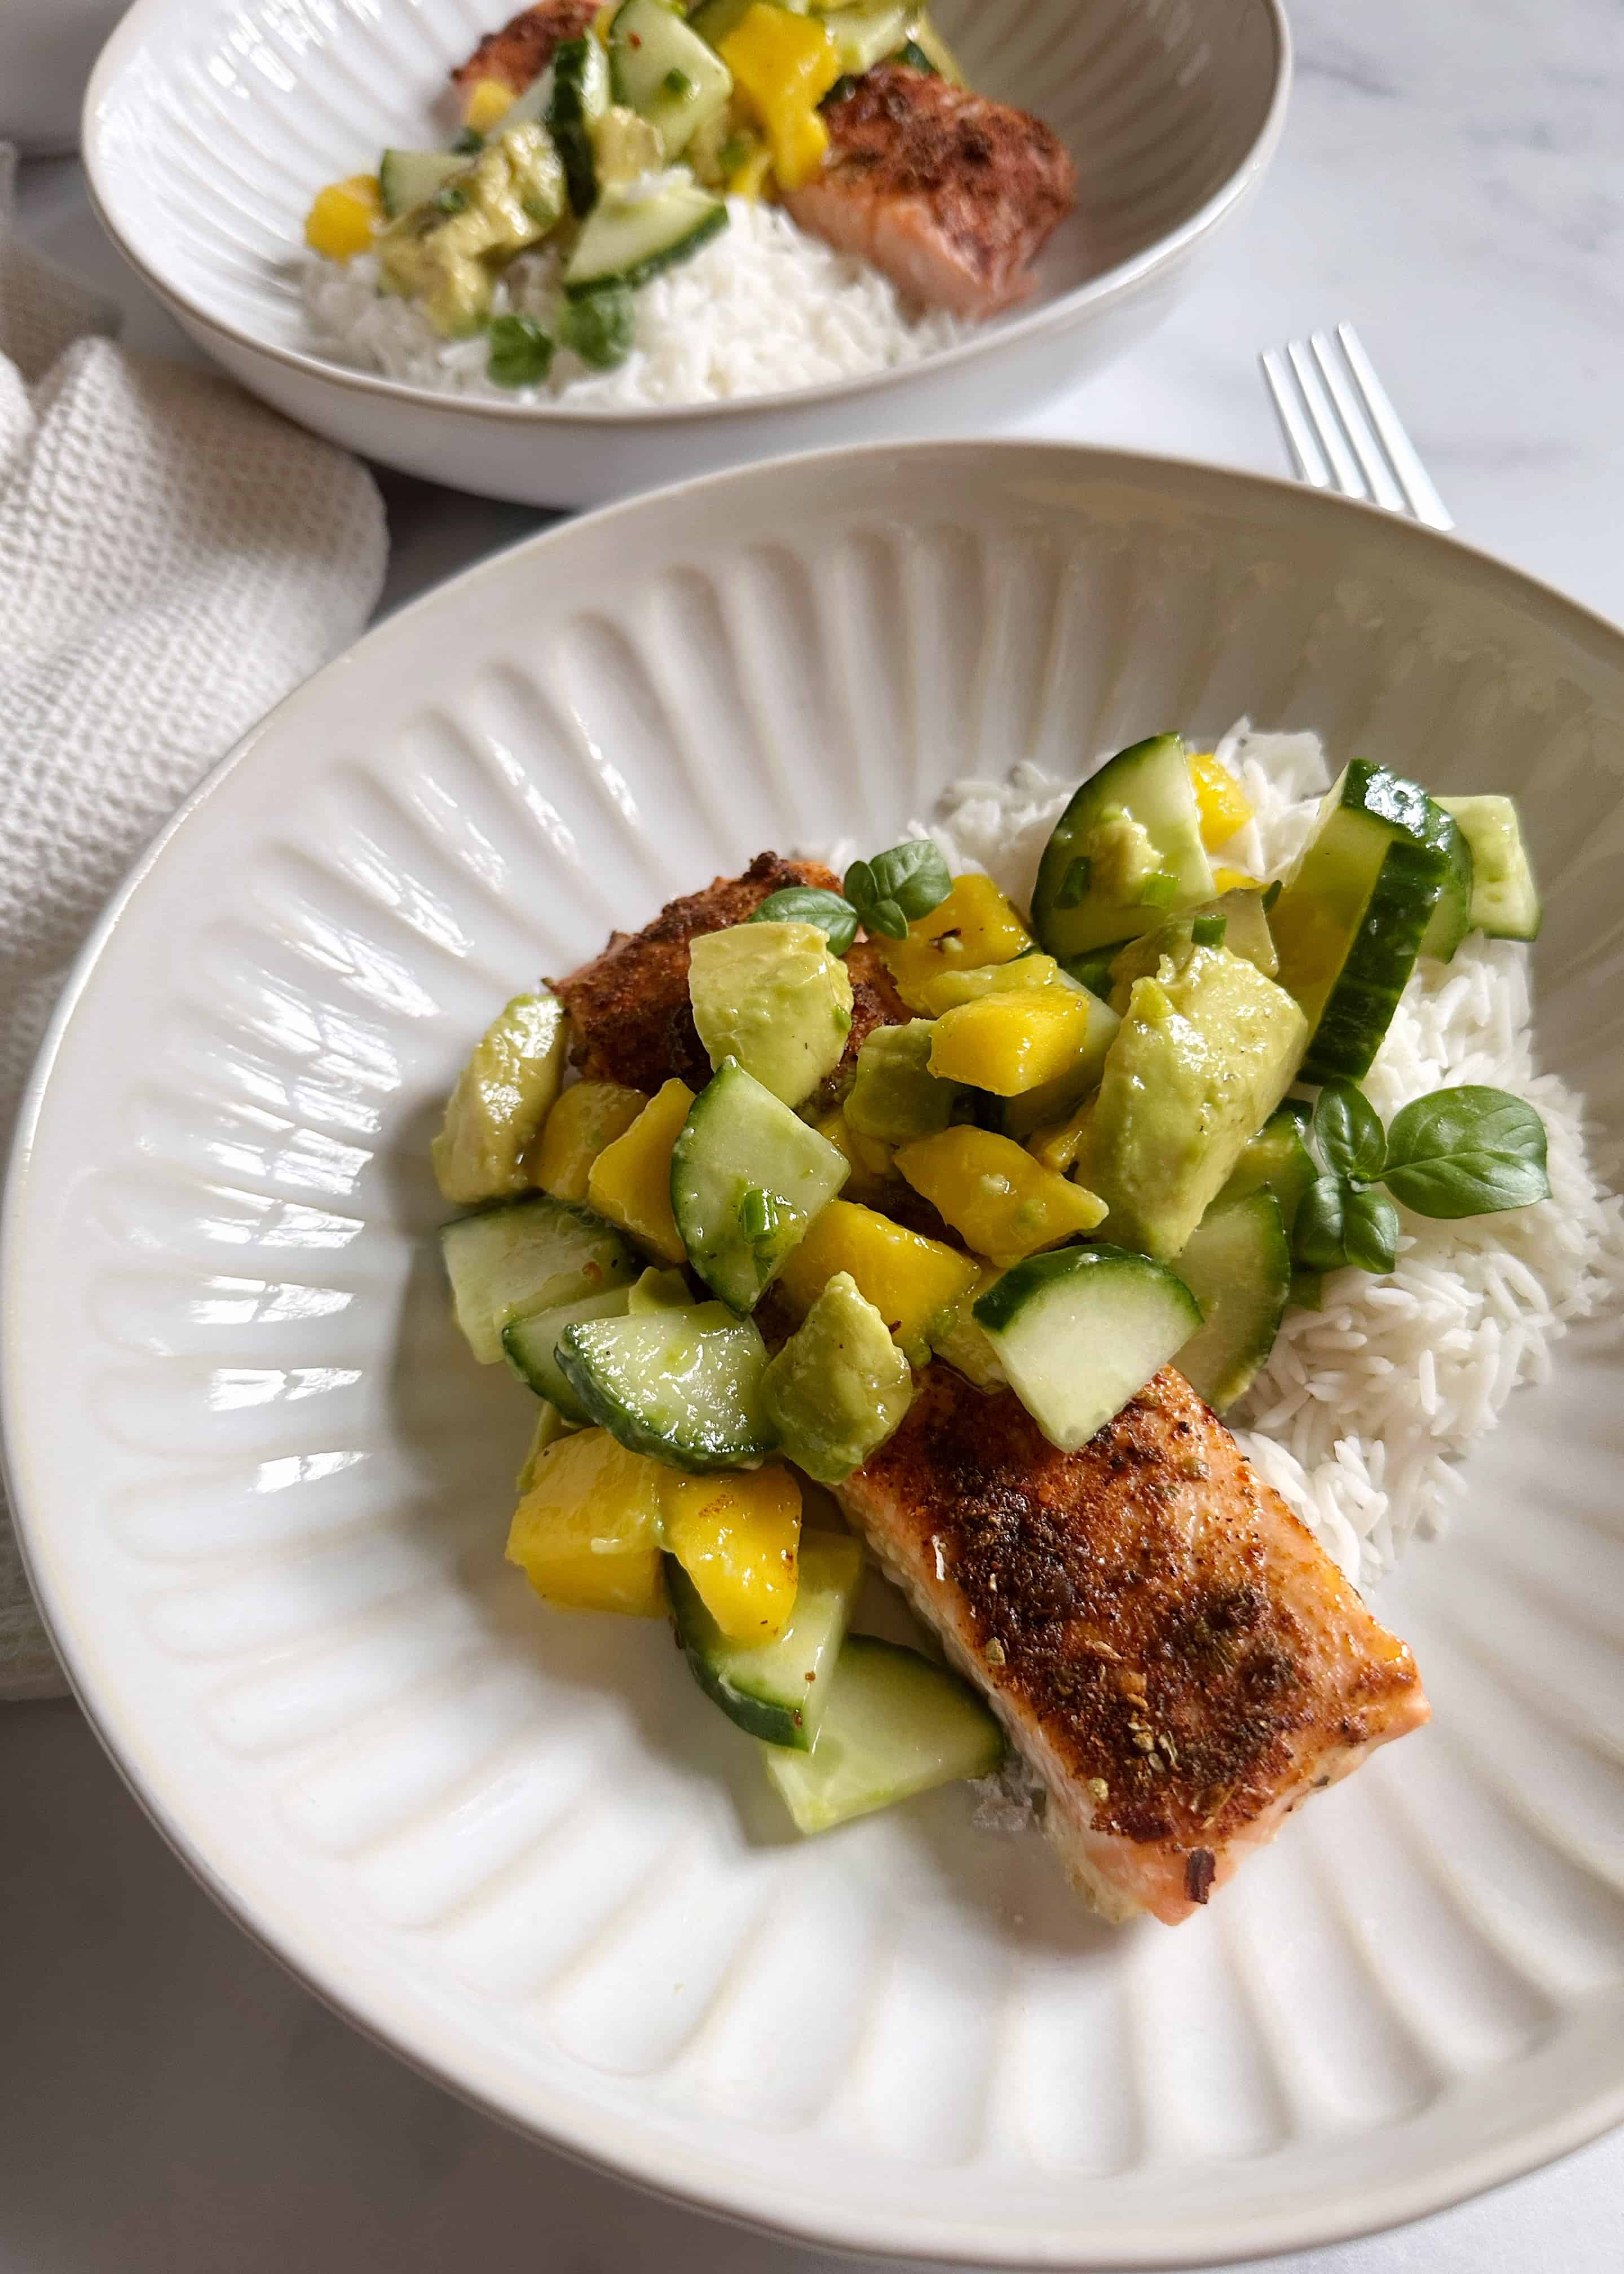 salmon with avocado cucumber salad over rice